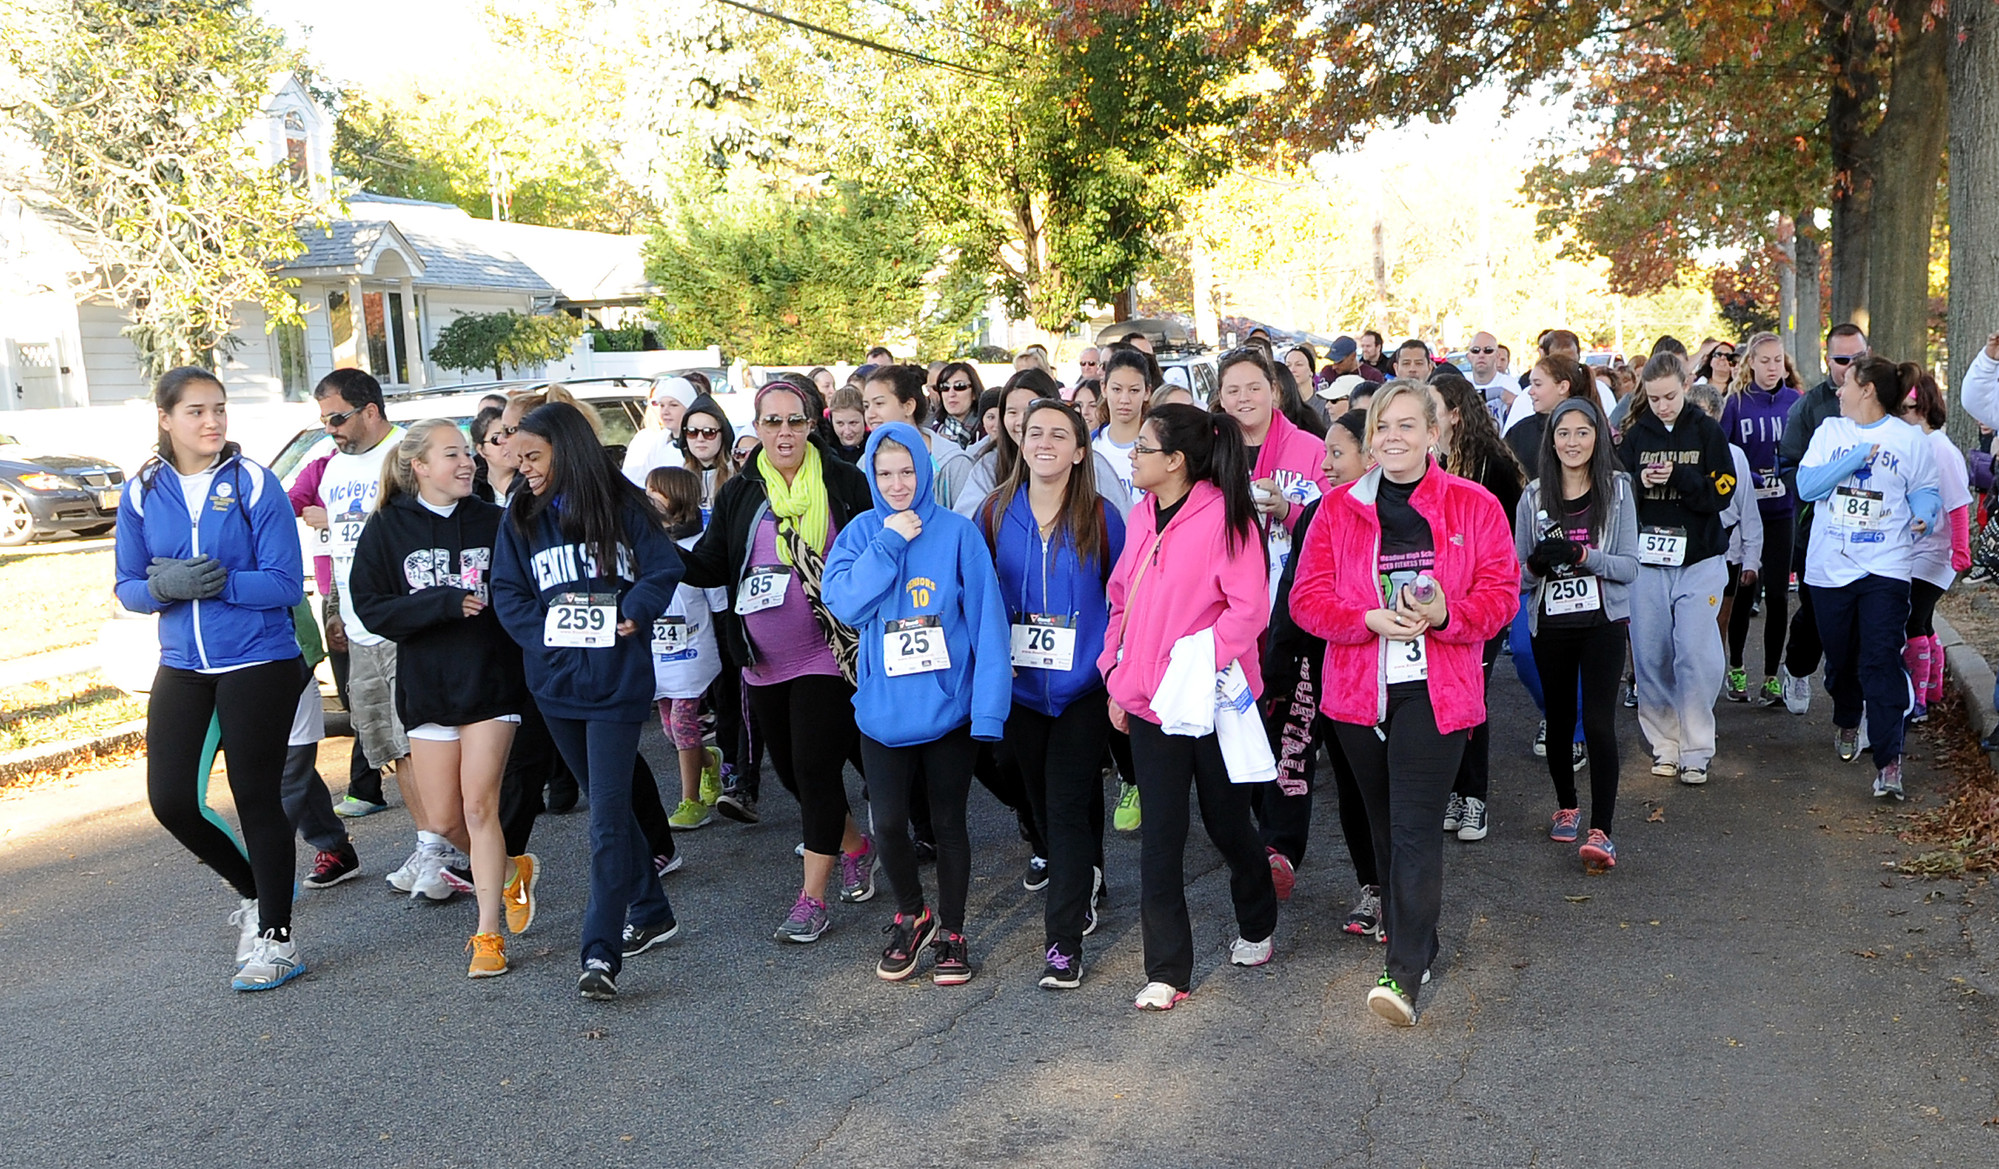 Many of the race participants preferred to enjoy the brisk, autumn scenery along the 5K path on Sunday.